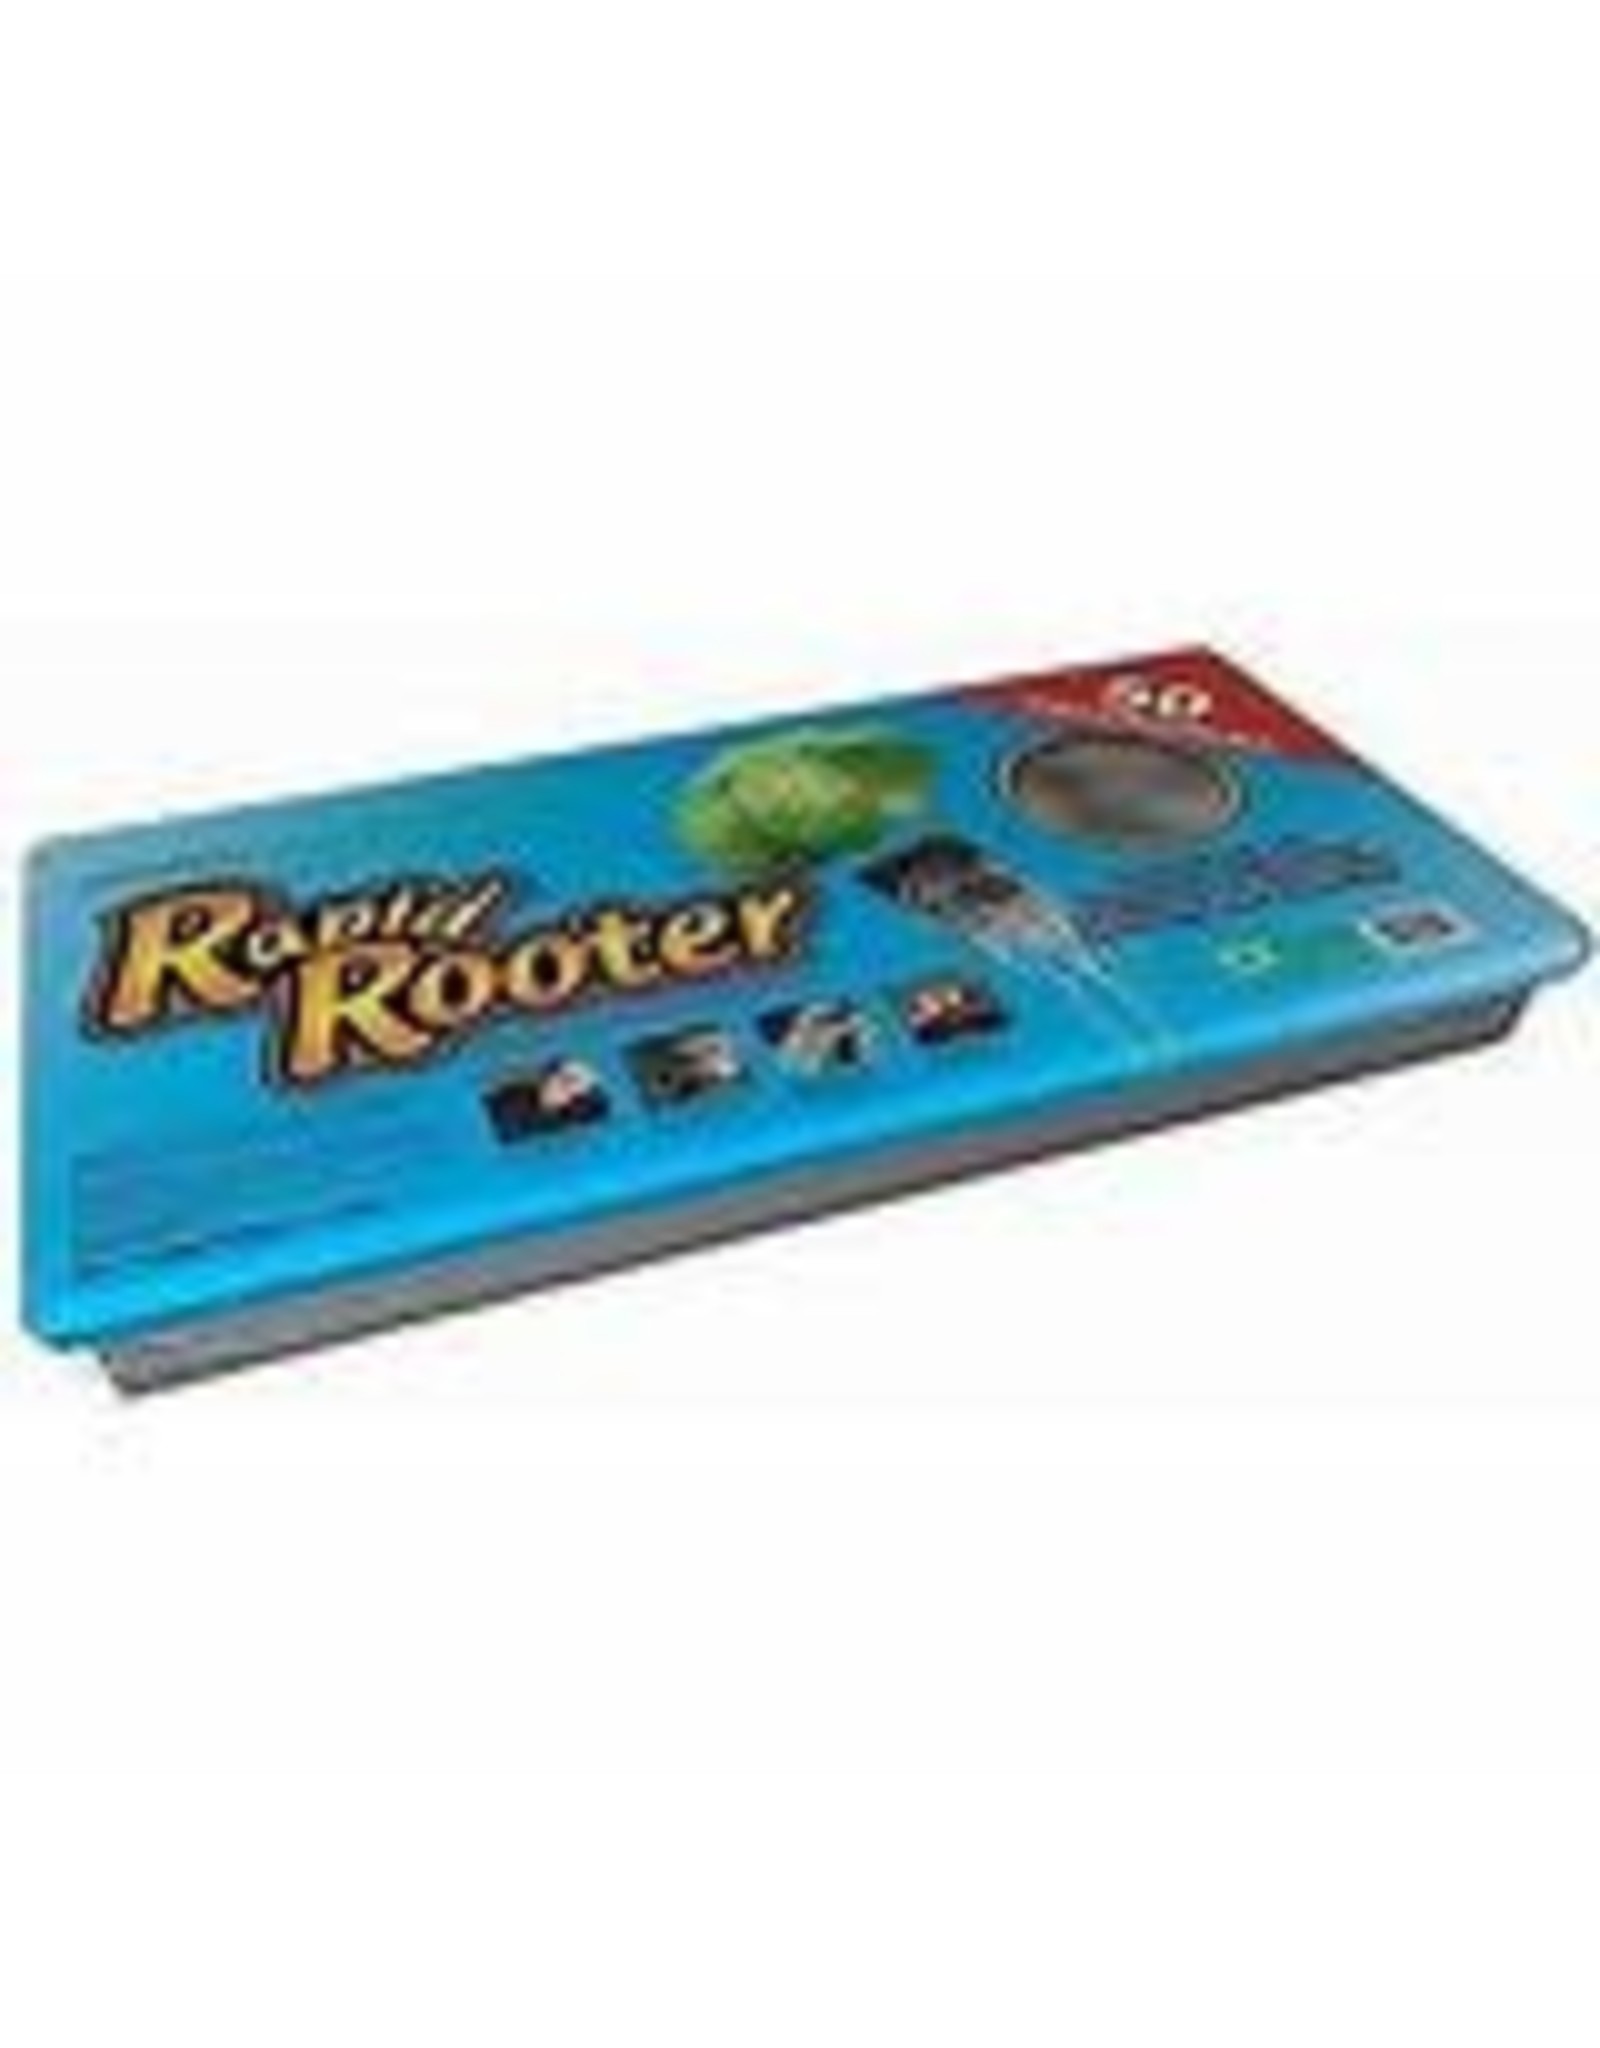 General Hydroponics GH Rapid Rooter 50 Cell Plug Tray